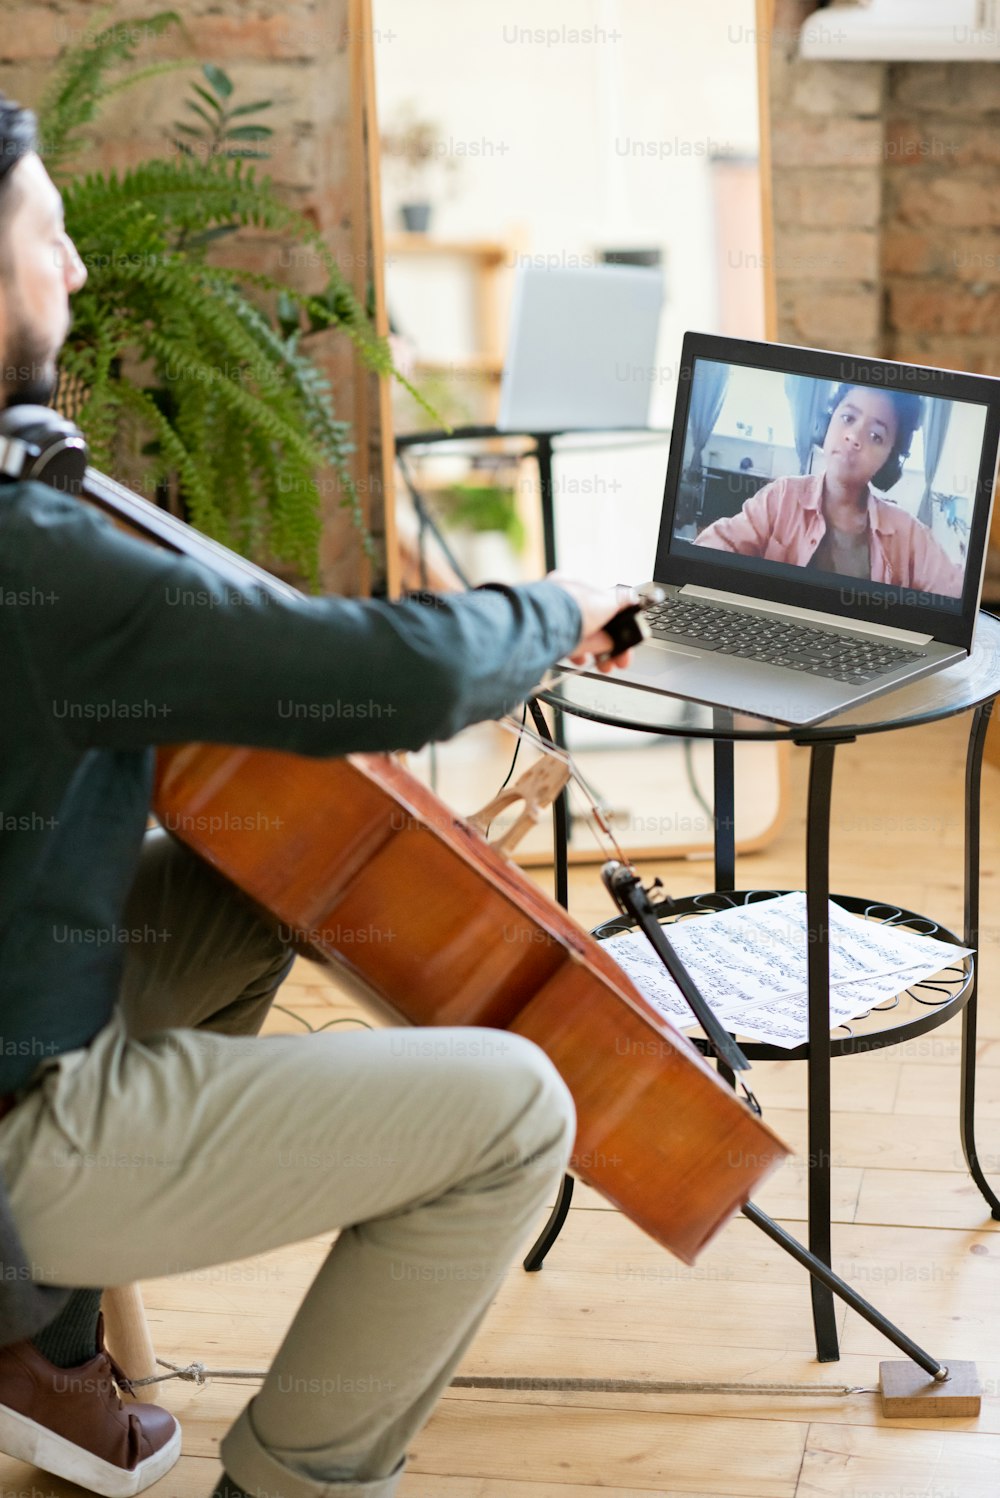 Cute African schoolboy on laptop screen looking at music teacher playing cello while sitting in home environment